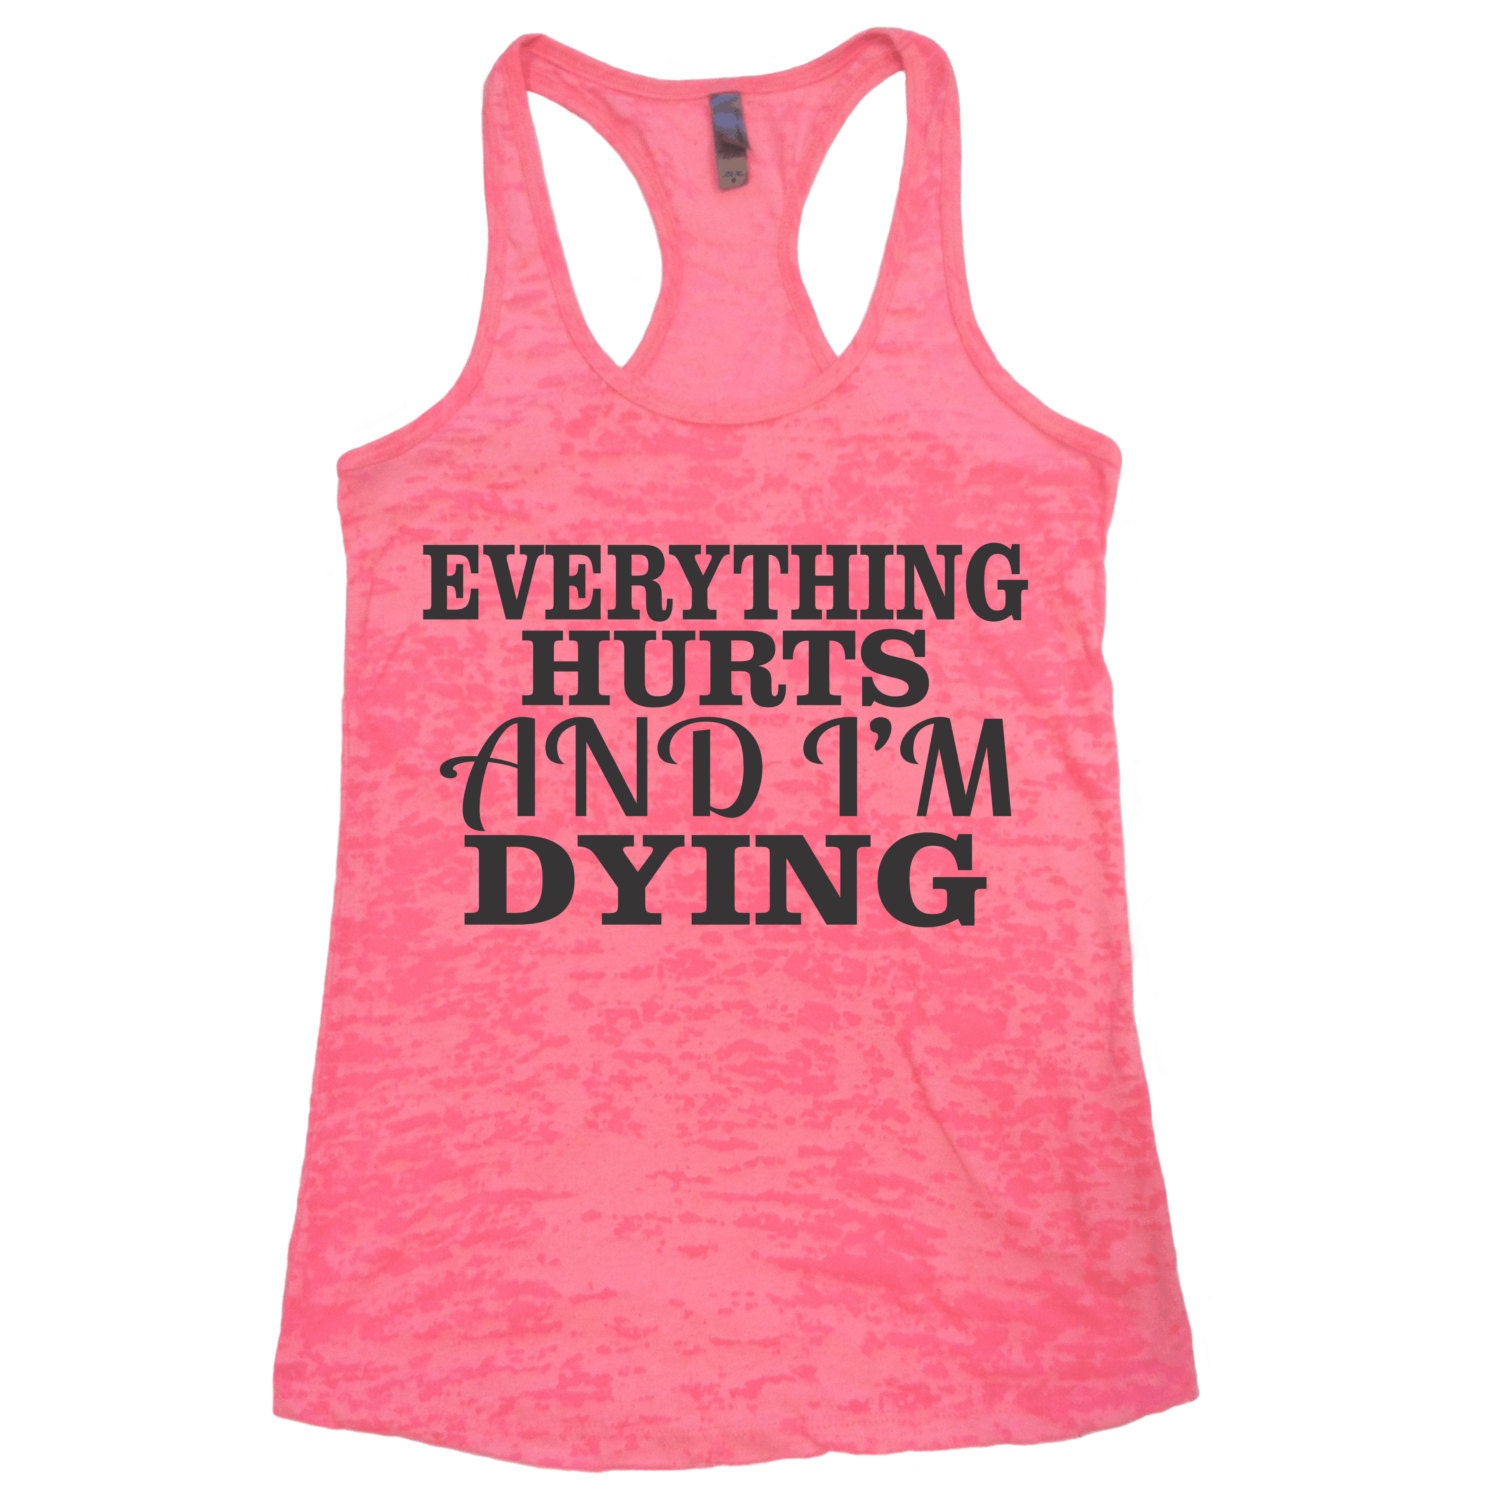 Everything Hurts And I'm Dying / Burnout Tank by ElevatorFitness